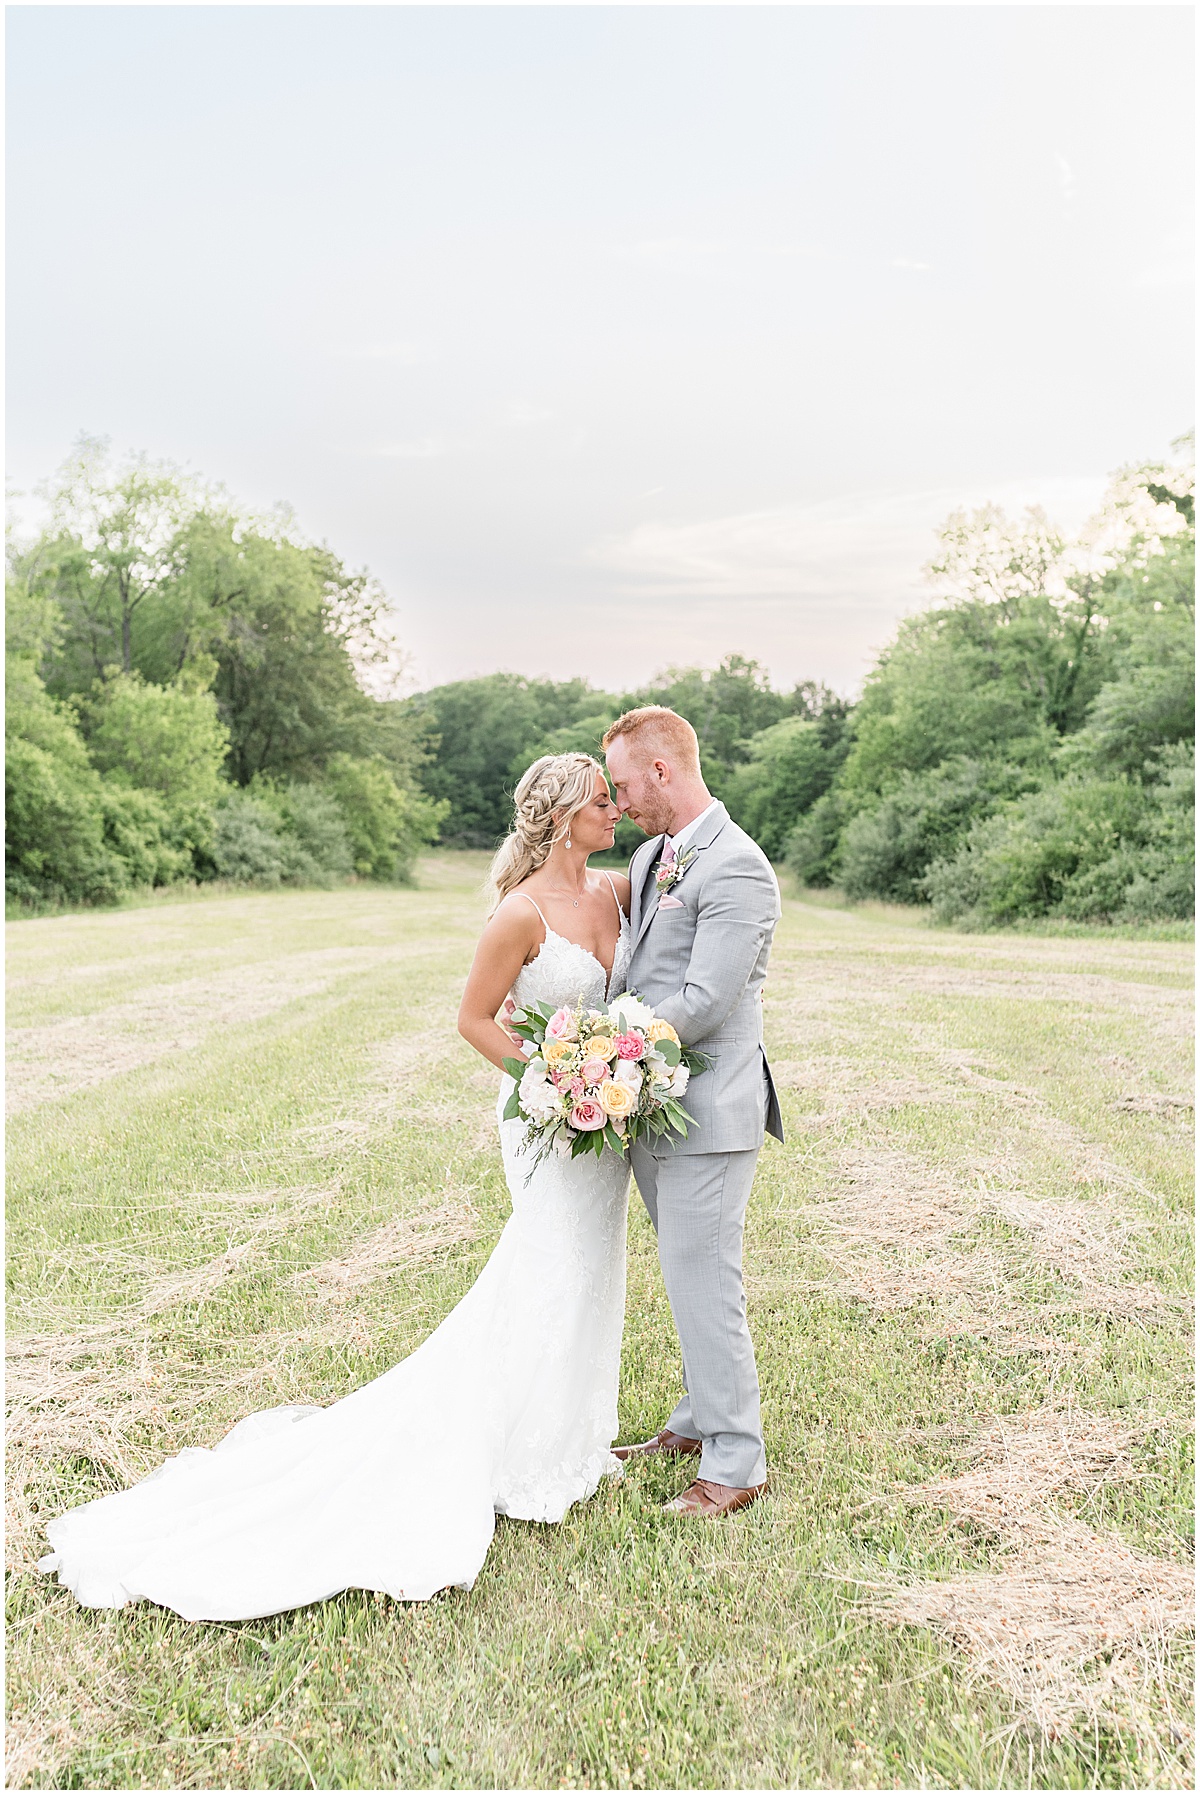 Bride and groom get close after wedding at New Journey Farms in Lafayette, Indiana